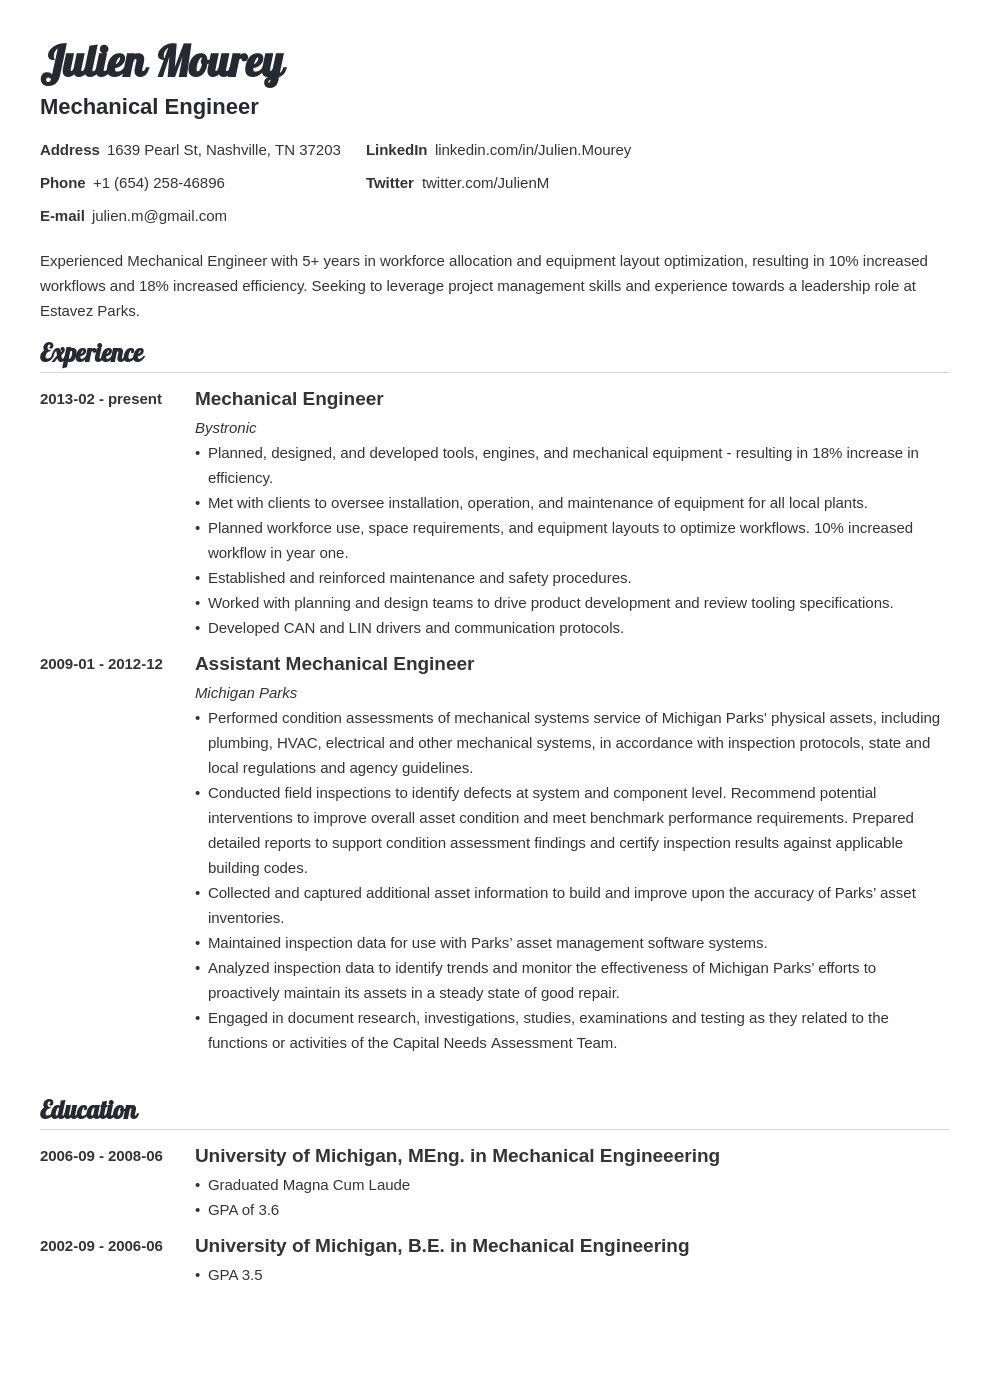 Mechanical Engineer Resume Template from cdn-images.zety.com